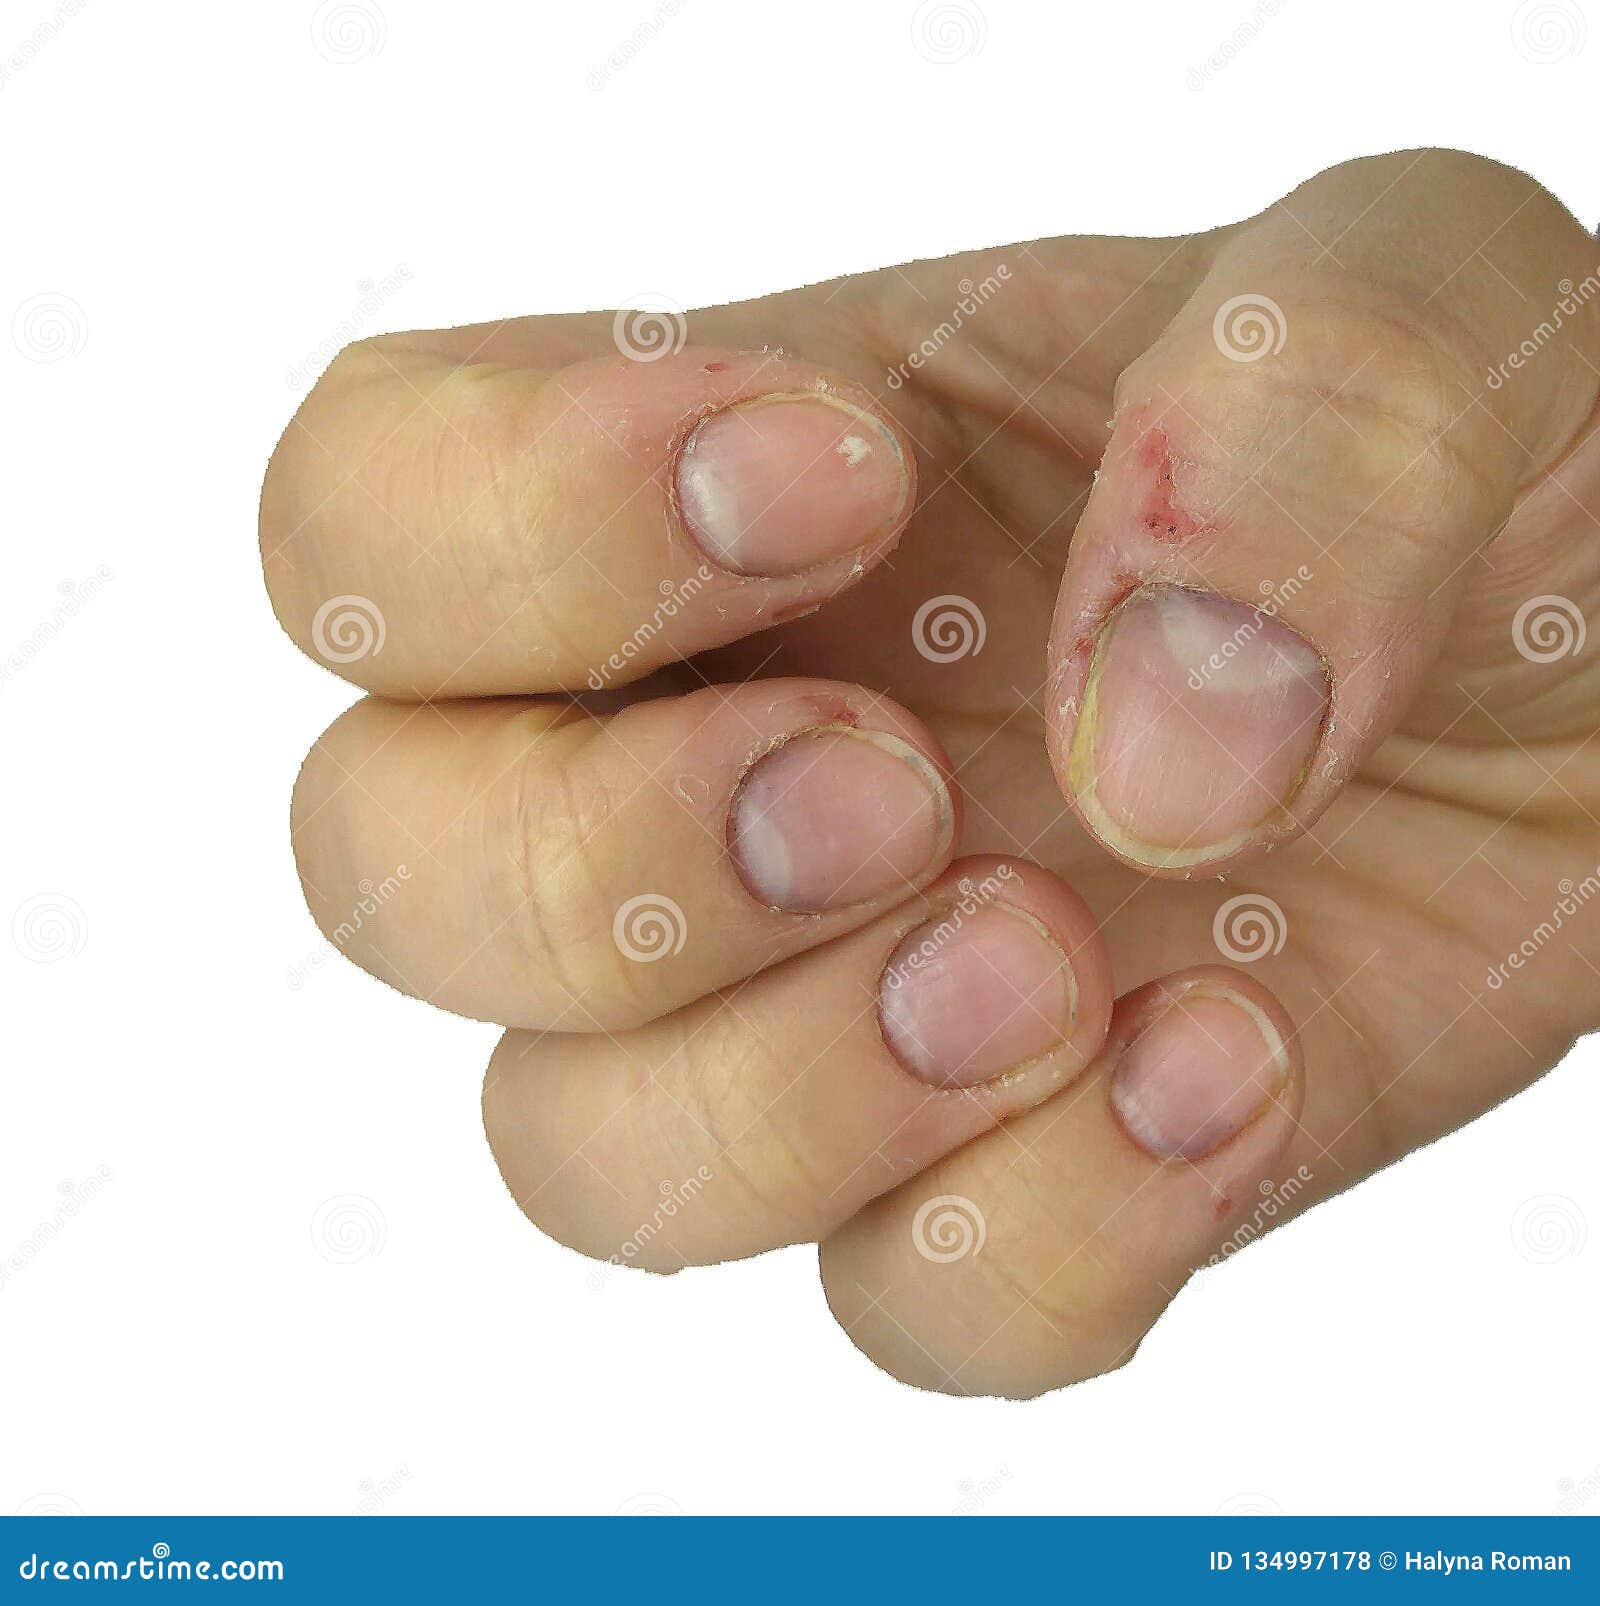 Fingers with signs of nail biting Close up of adult female hand with  chewed nails and